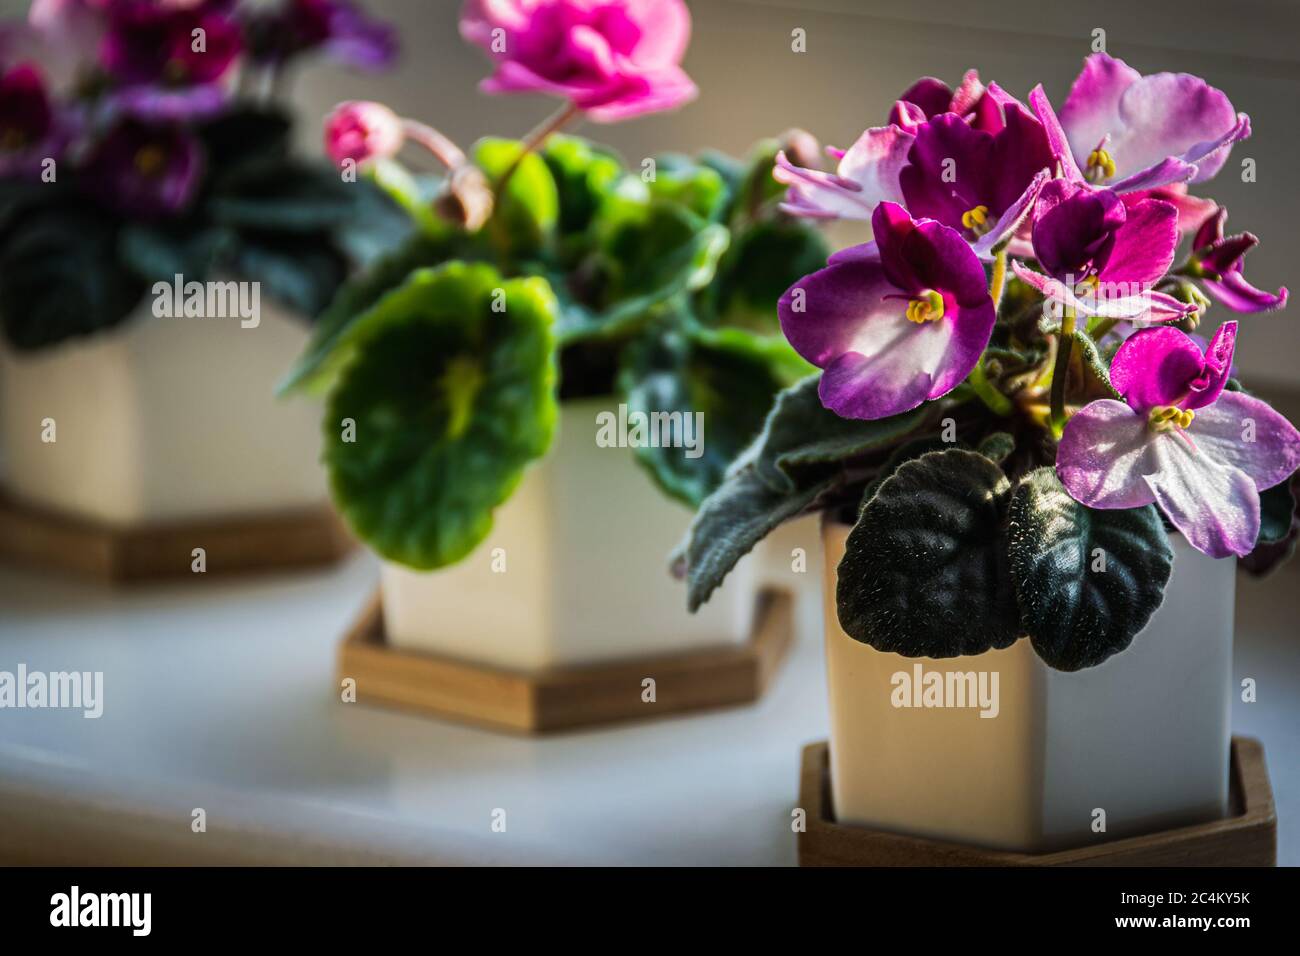 African violets (Streptocarpus sect. Saintpaulia) with pink and purple flowers in decorative pots on a sunny windowsill. Stock Photo